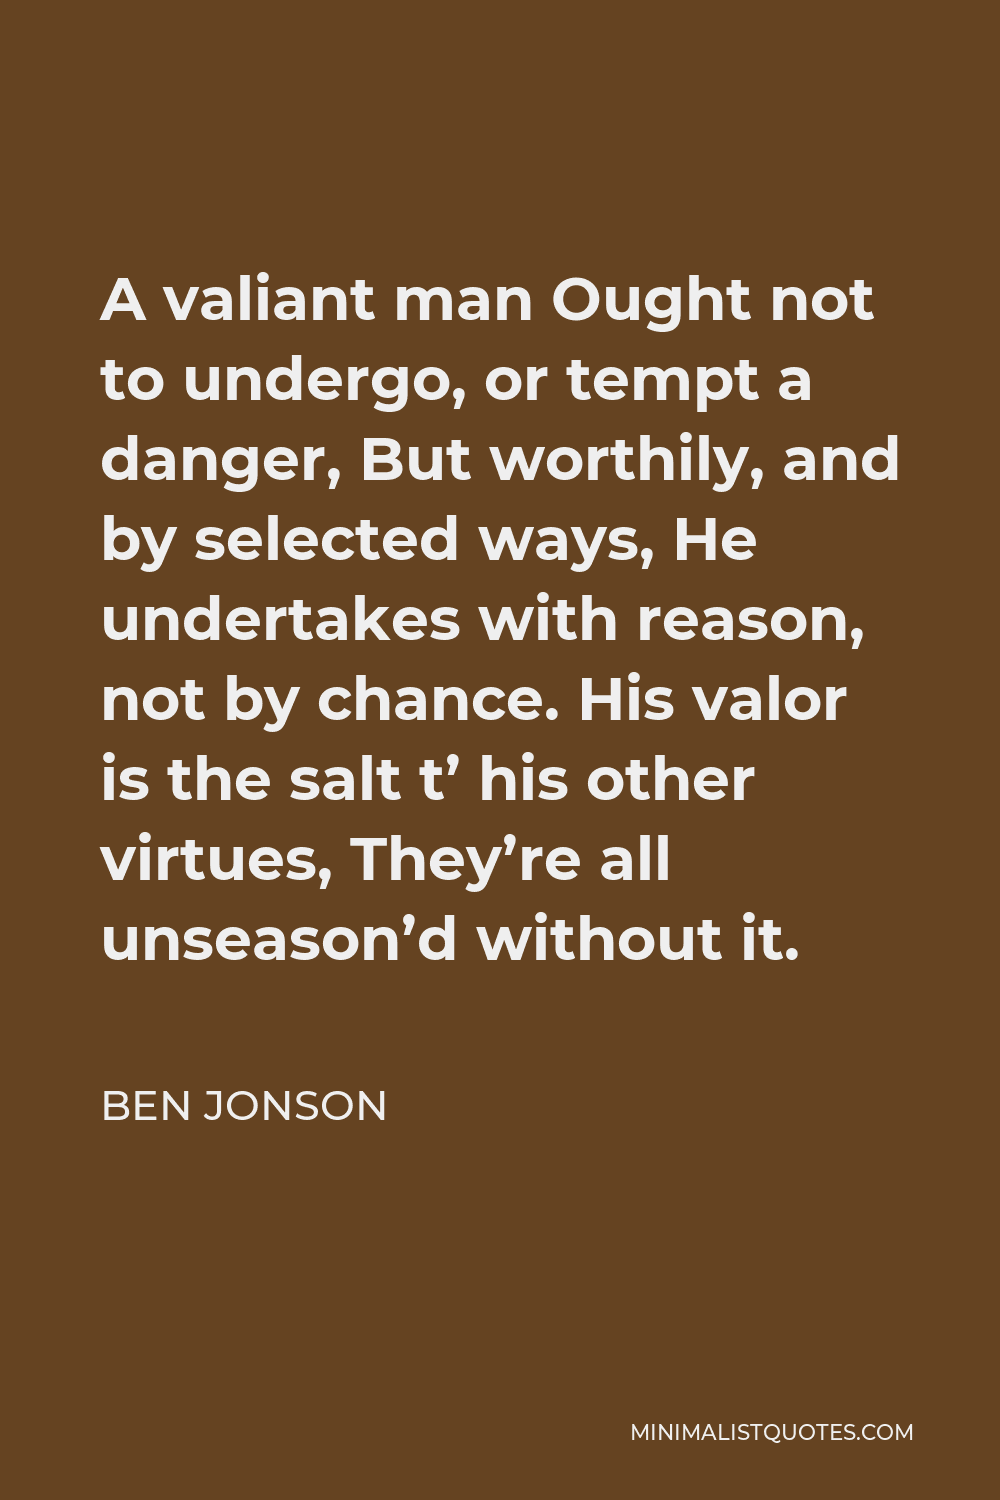 Ben Jonson Quote - A valiant man Ought not to undergo, or tempt a danger, But worthily, and by selected ways, He undertakes with reason, not by chance. His valor is the salt t’ his other virtues, They’re all unseason’d without it.